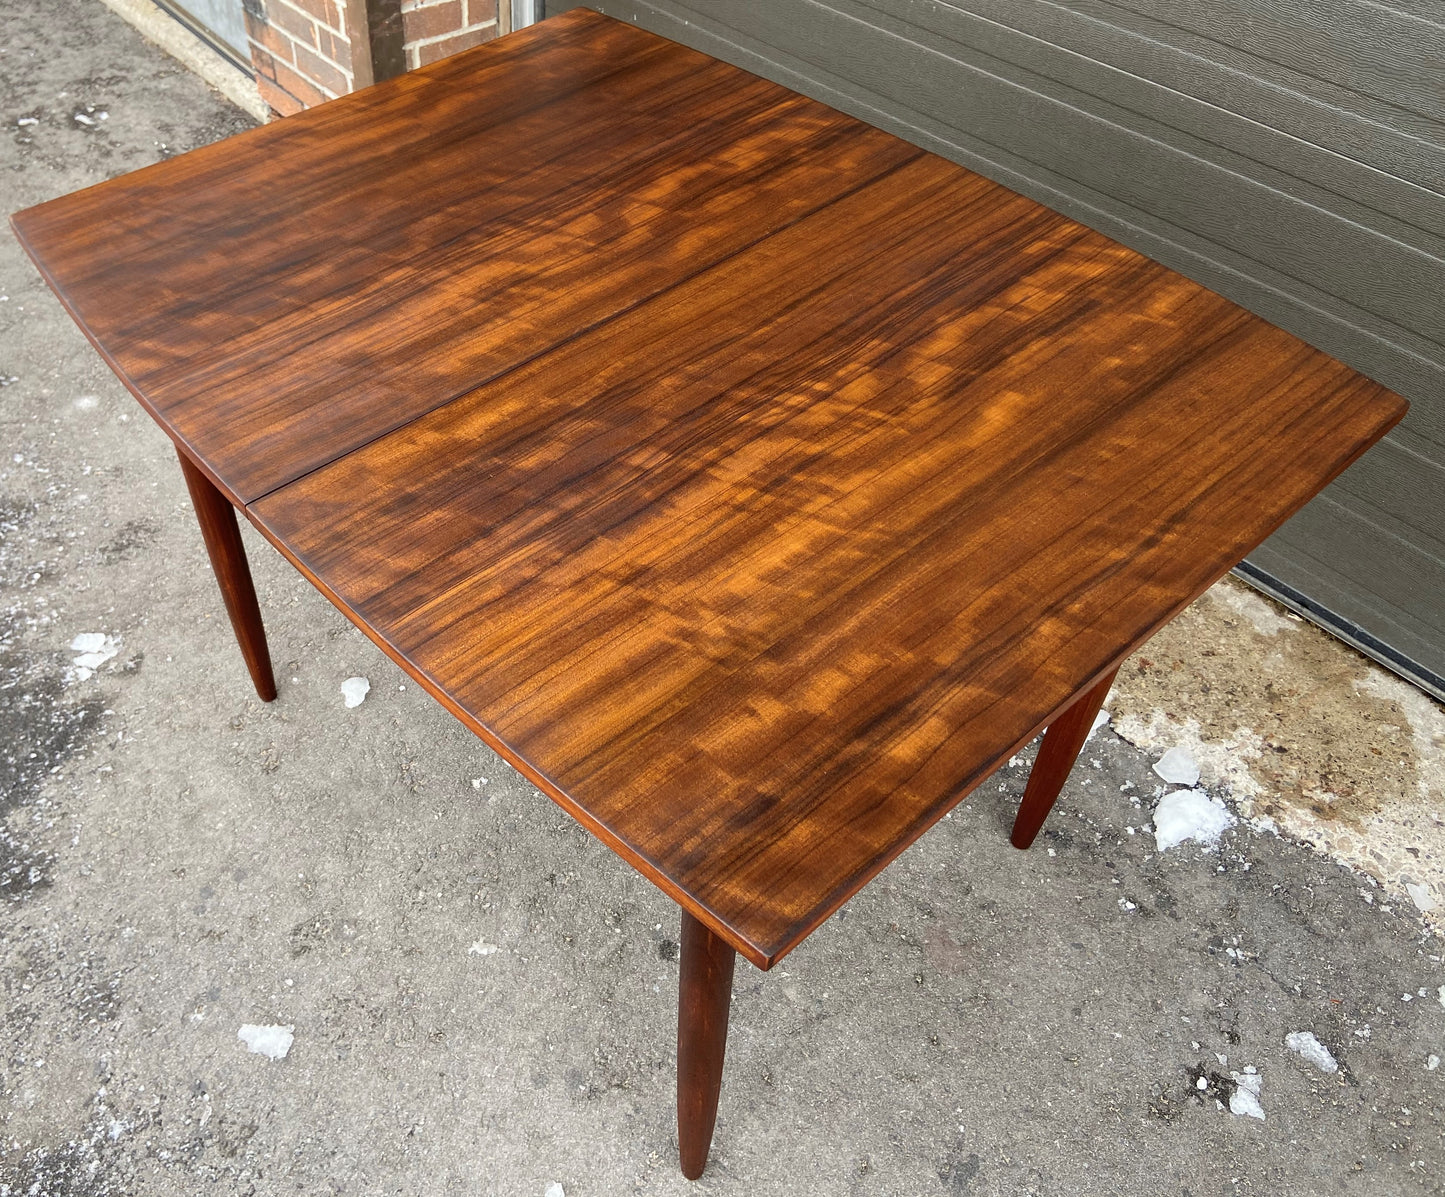 REFINISHED British MCM Extendable Dining Table by A. Cox, Perfect, Compact 42"-58"